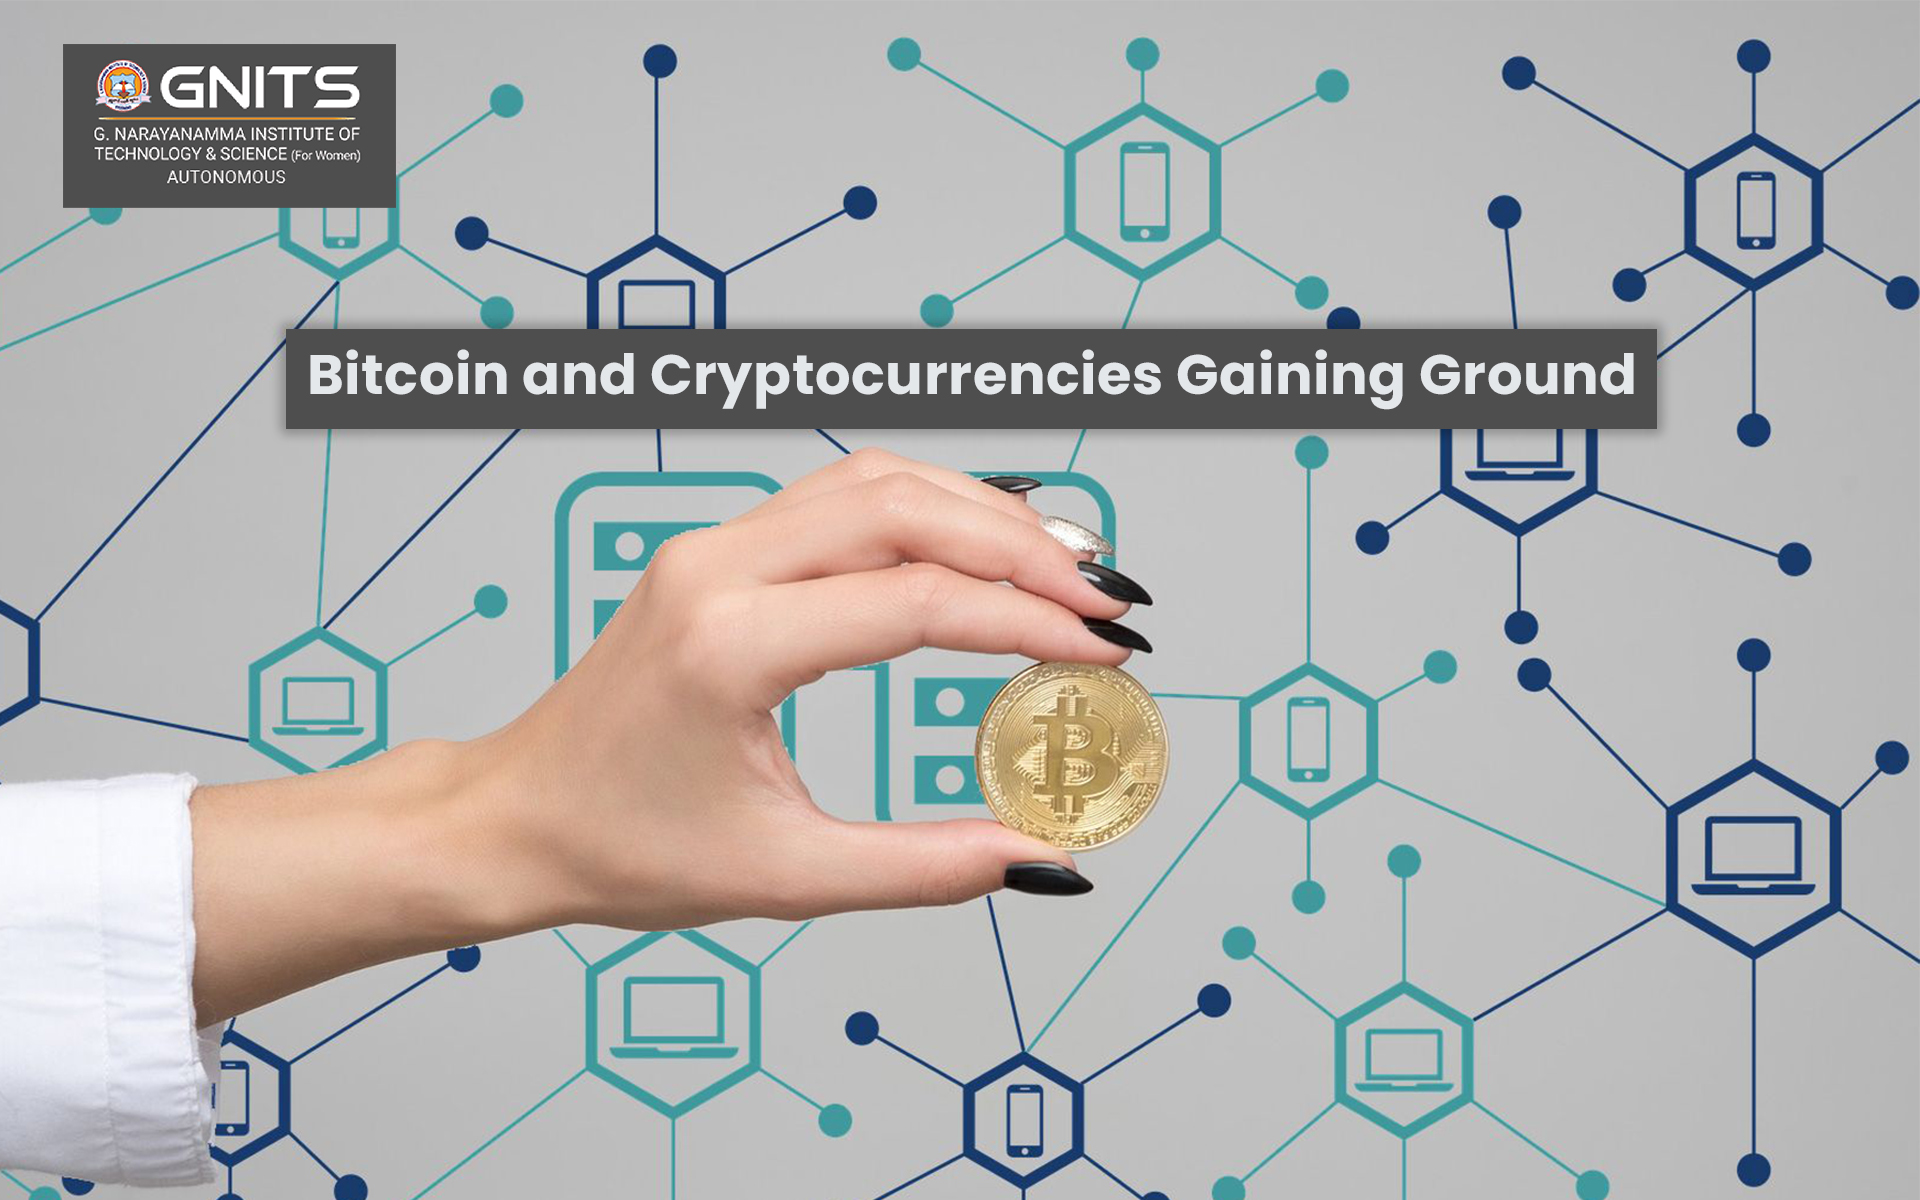 Bitcoin and Cryptocurrencies Gaining Ground